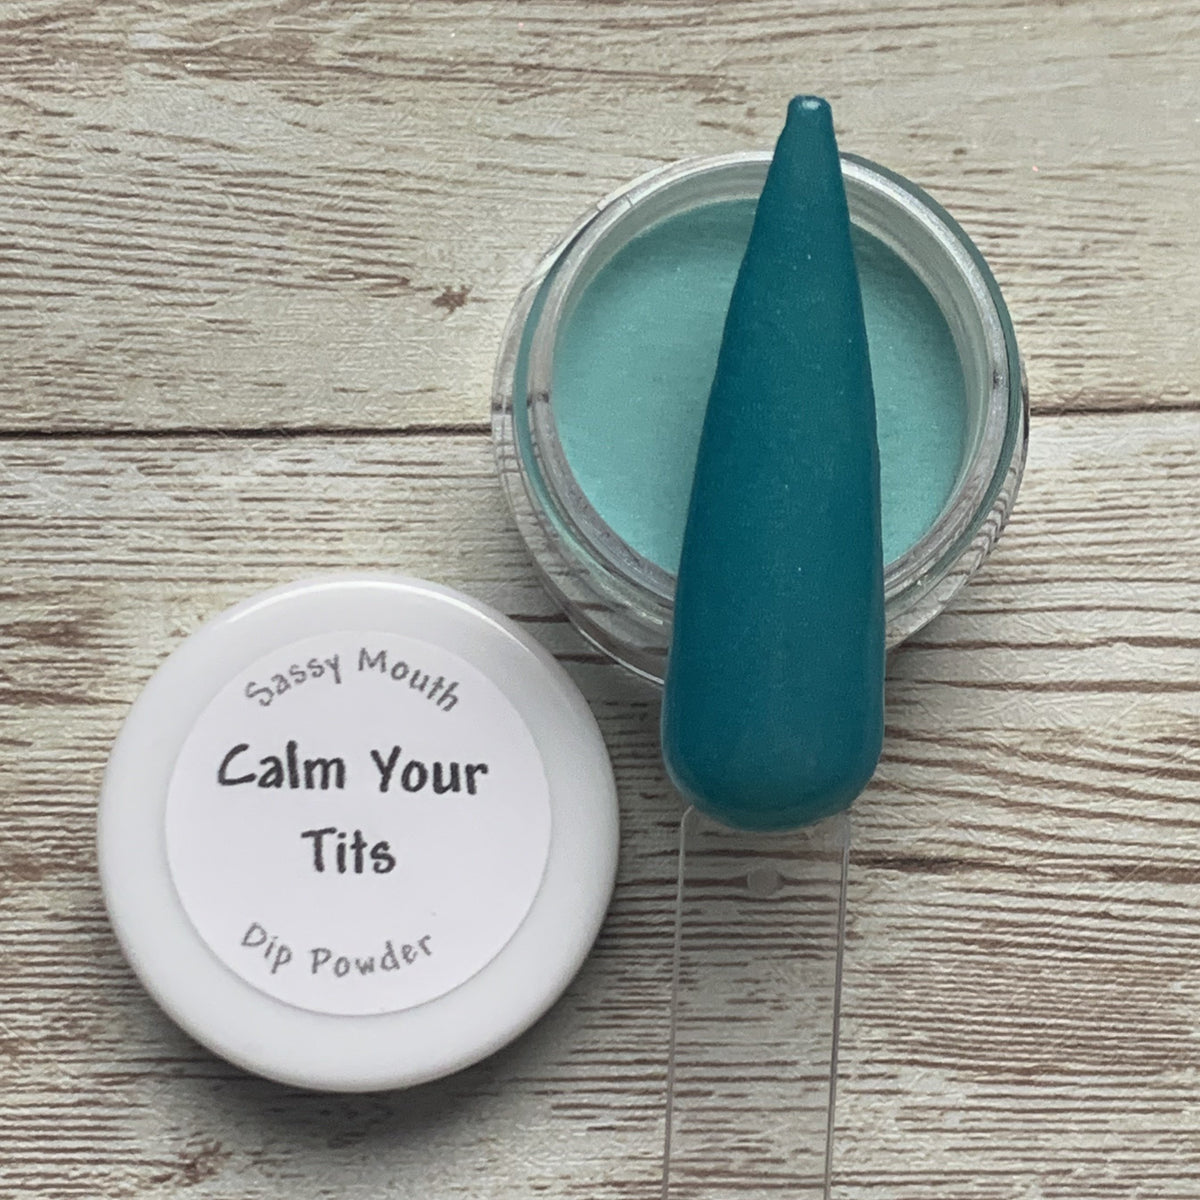 Calm Your Tits – Sassy Mouth Dip Powder